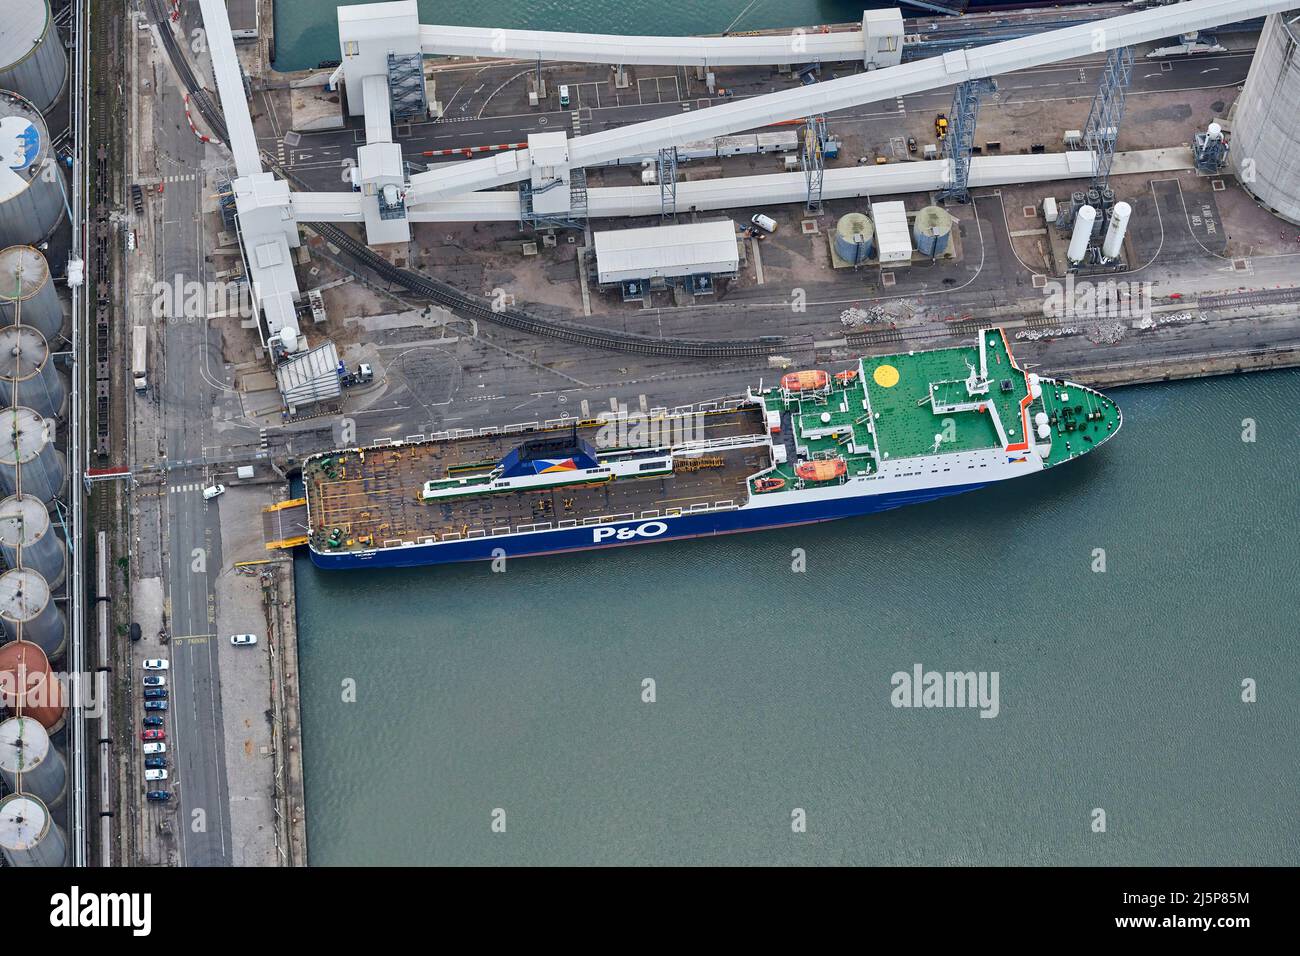 P & O ferry, in Seaforth Docks, Liverpool, Merseyside, northwest England, UK, from the air Stock Photo